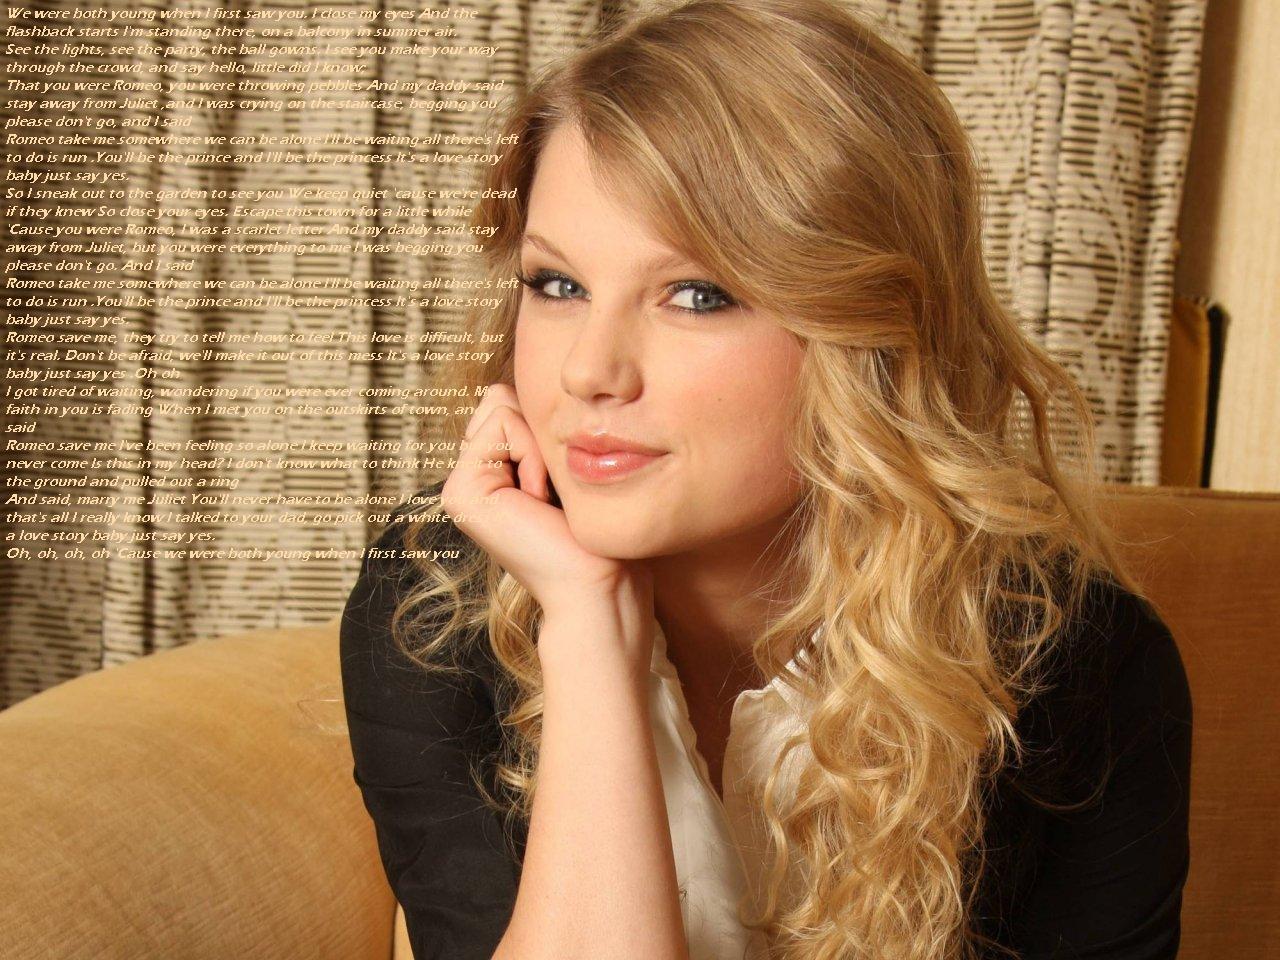 Taylor Swift Lover Hd Wallpapers Wallpaper Cave